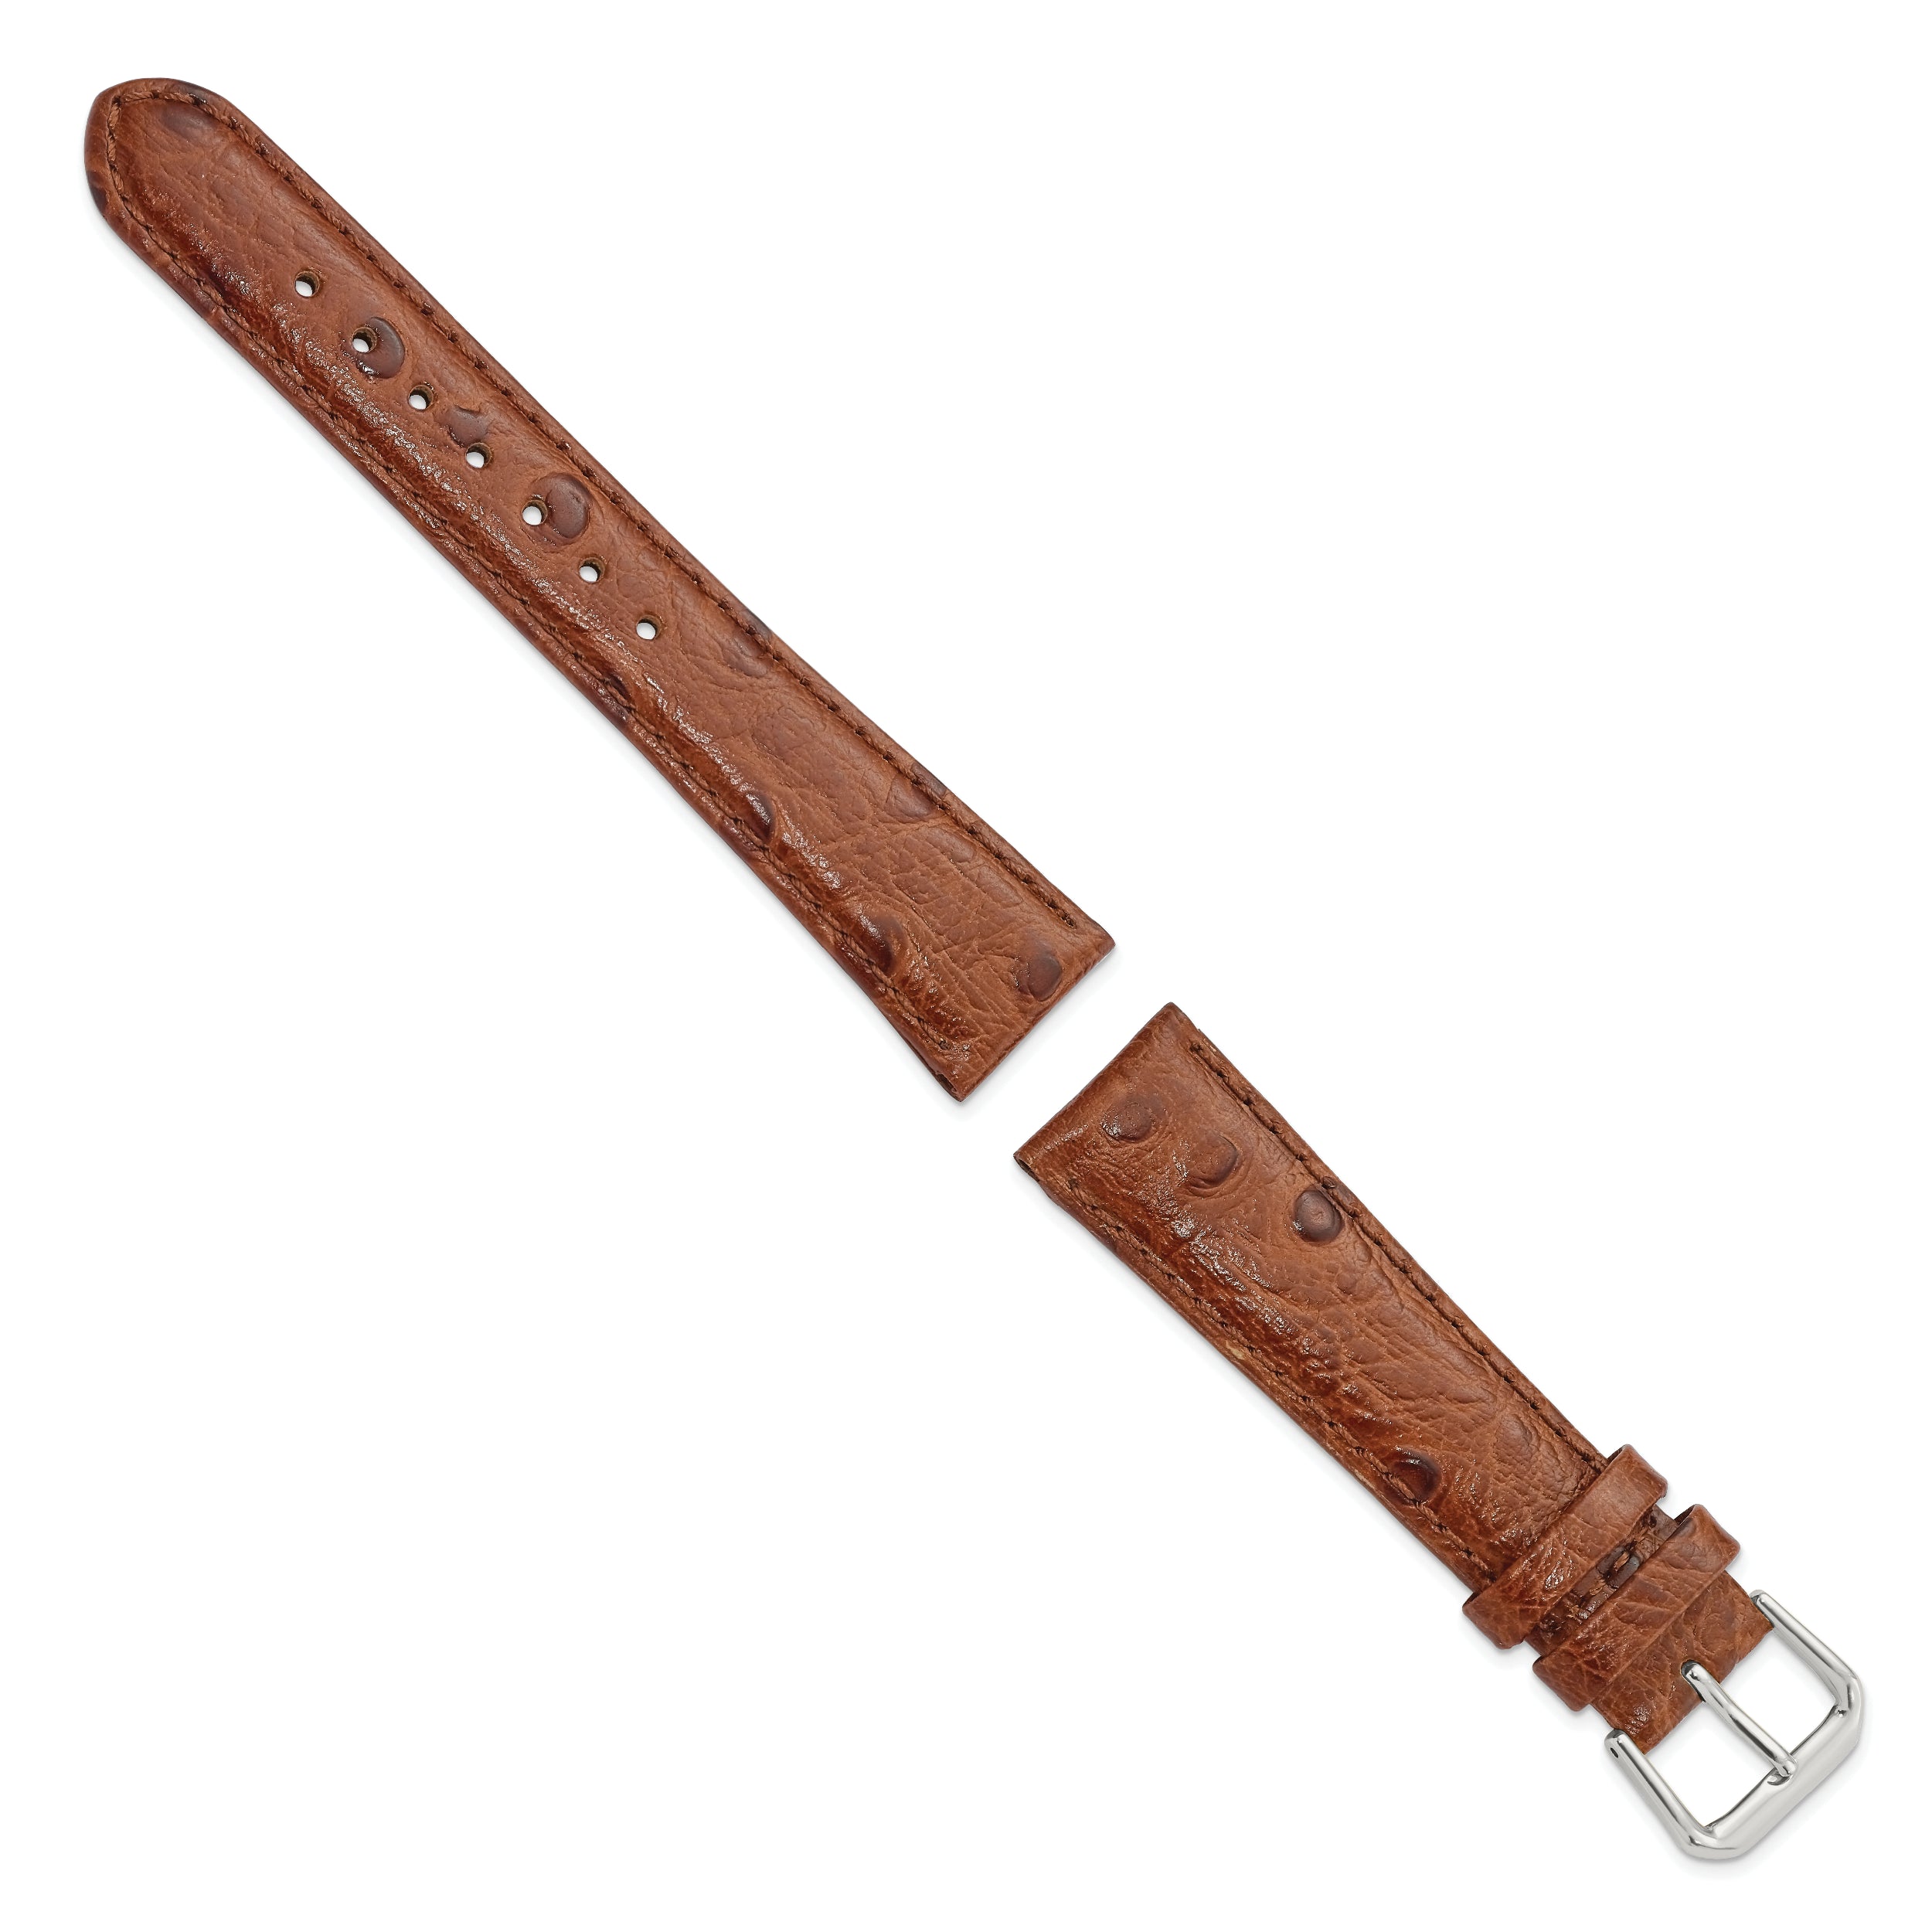 12mm Havana Ostrich Grain Leather with Silver-tone Buckle 6.75 inch Watch Band